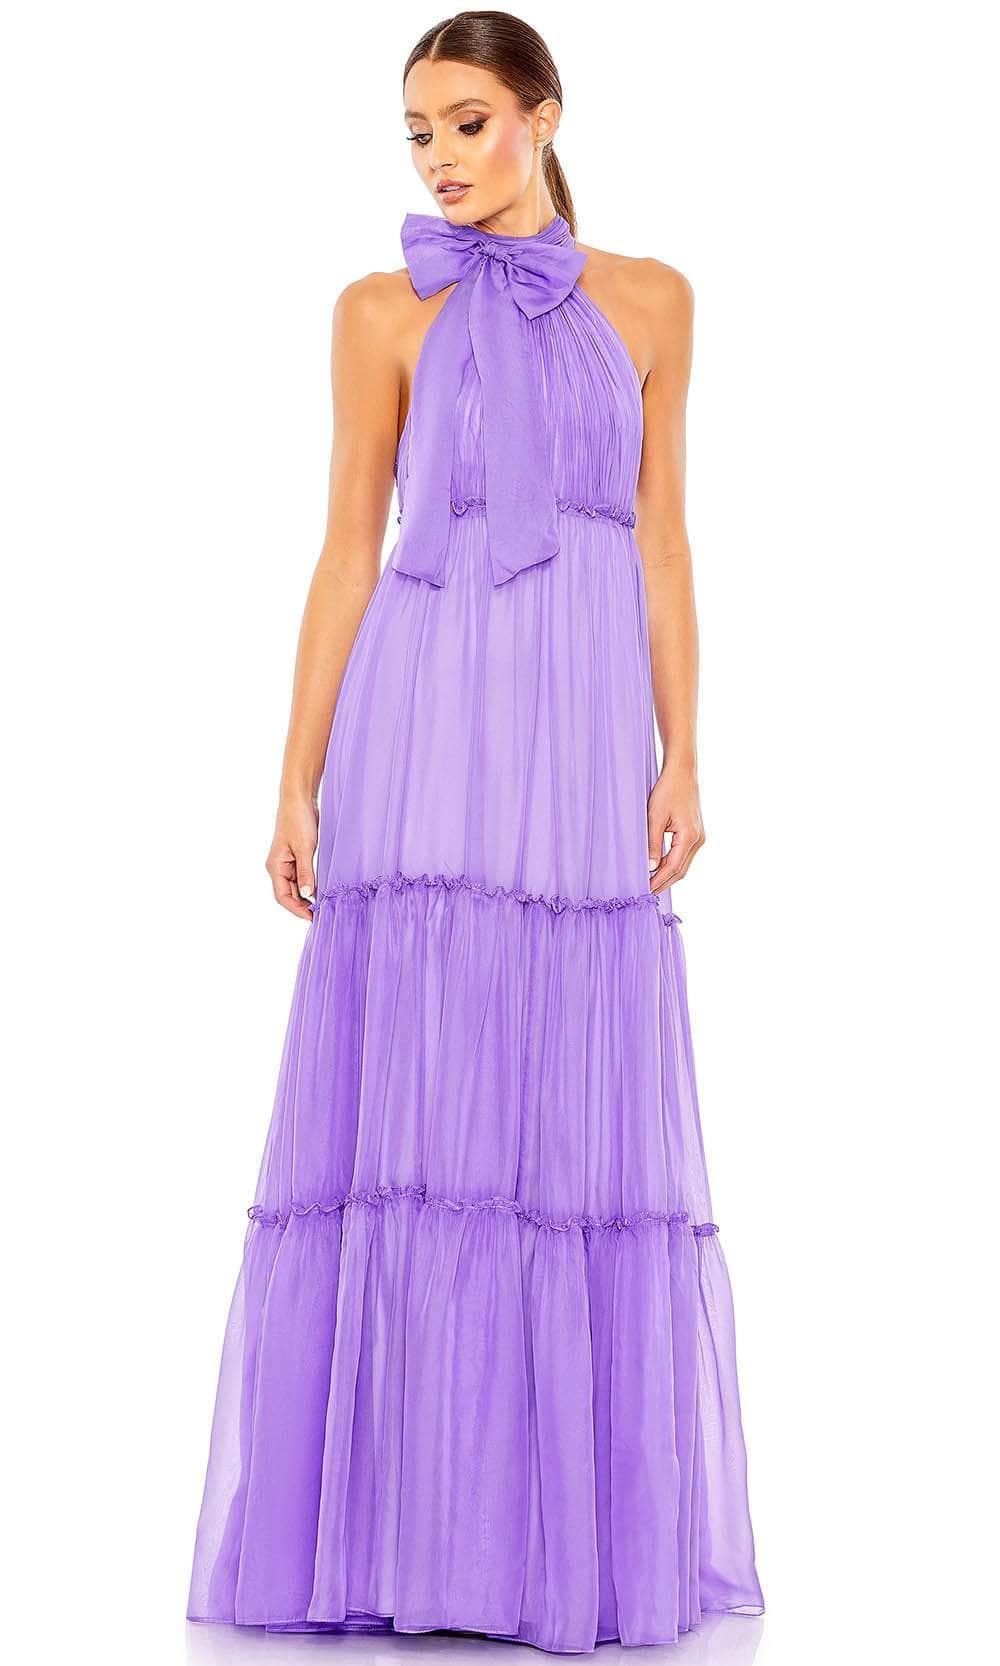 Ieena Duggal 55848 - Bow Accent Halter Evening Gown Evening Dresses 0 / Orchid